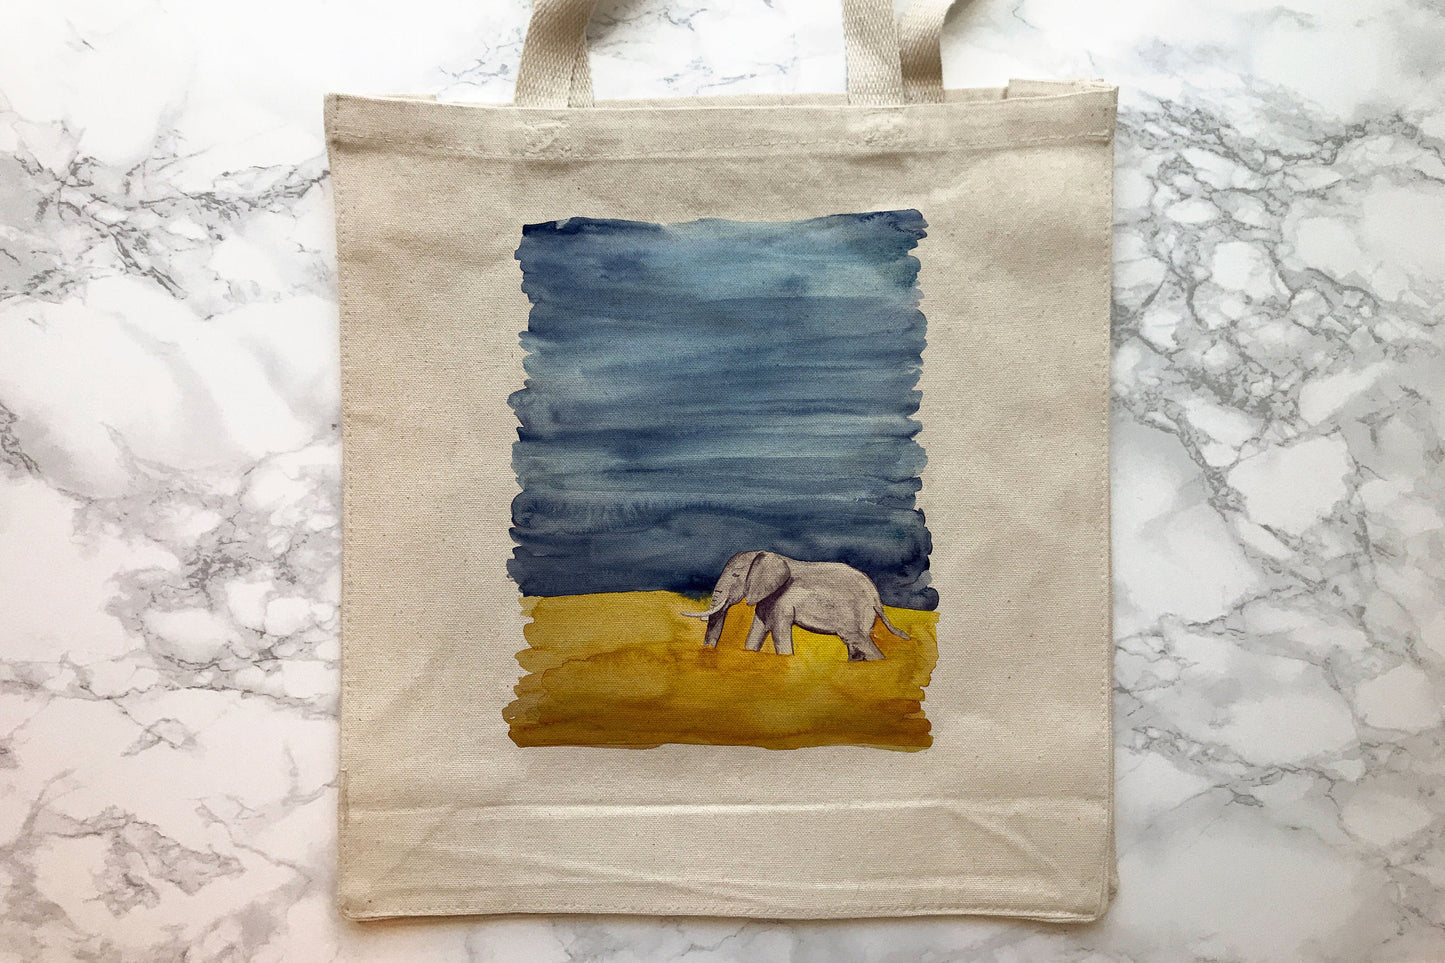 Painted Elephant Tote Bag